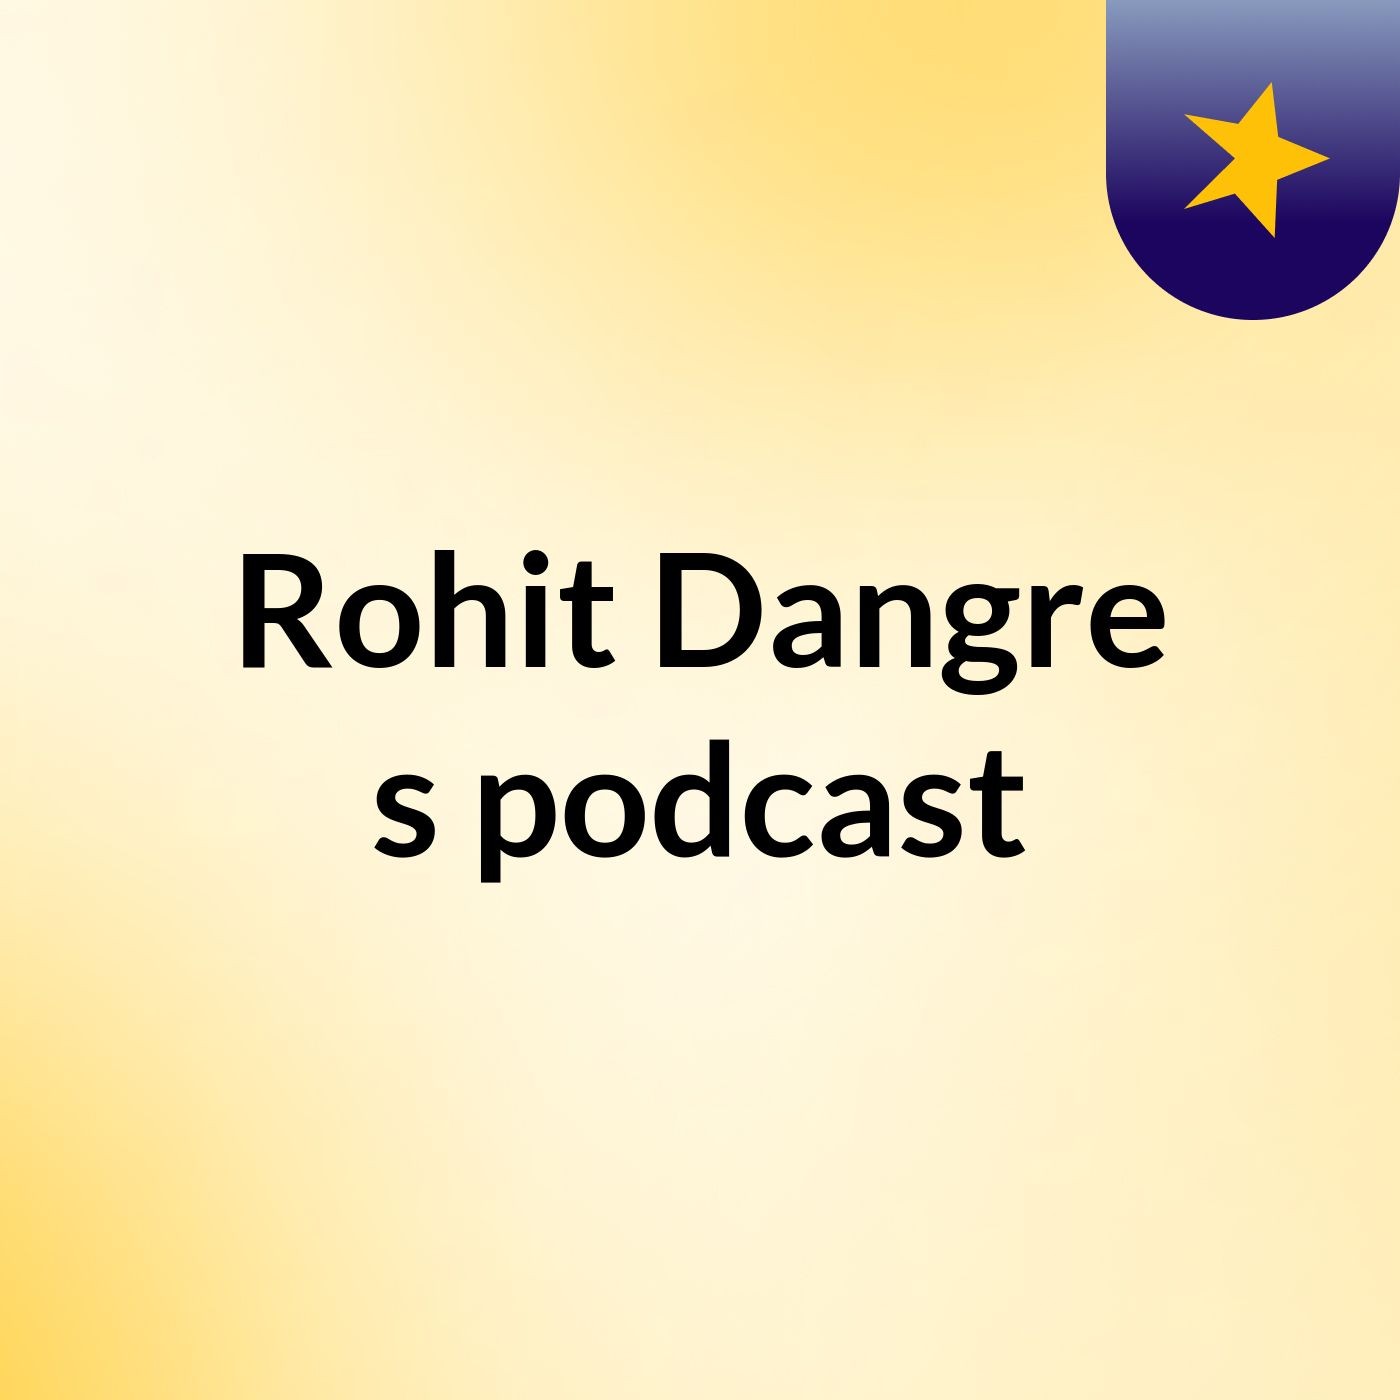 Episode 2 - Rohit Dangre's podcast